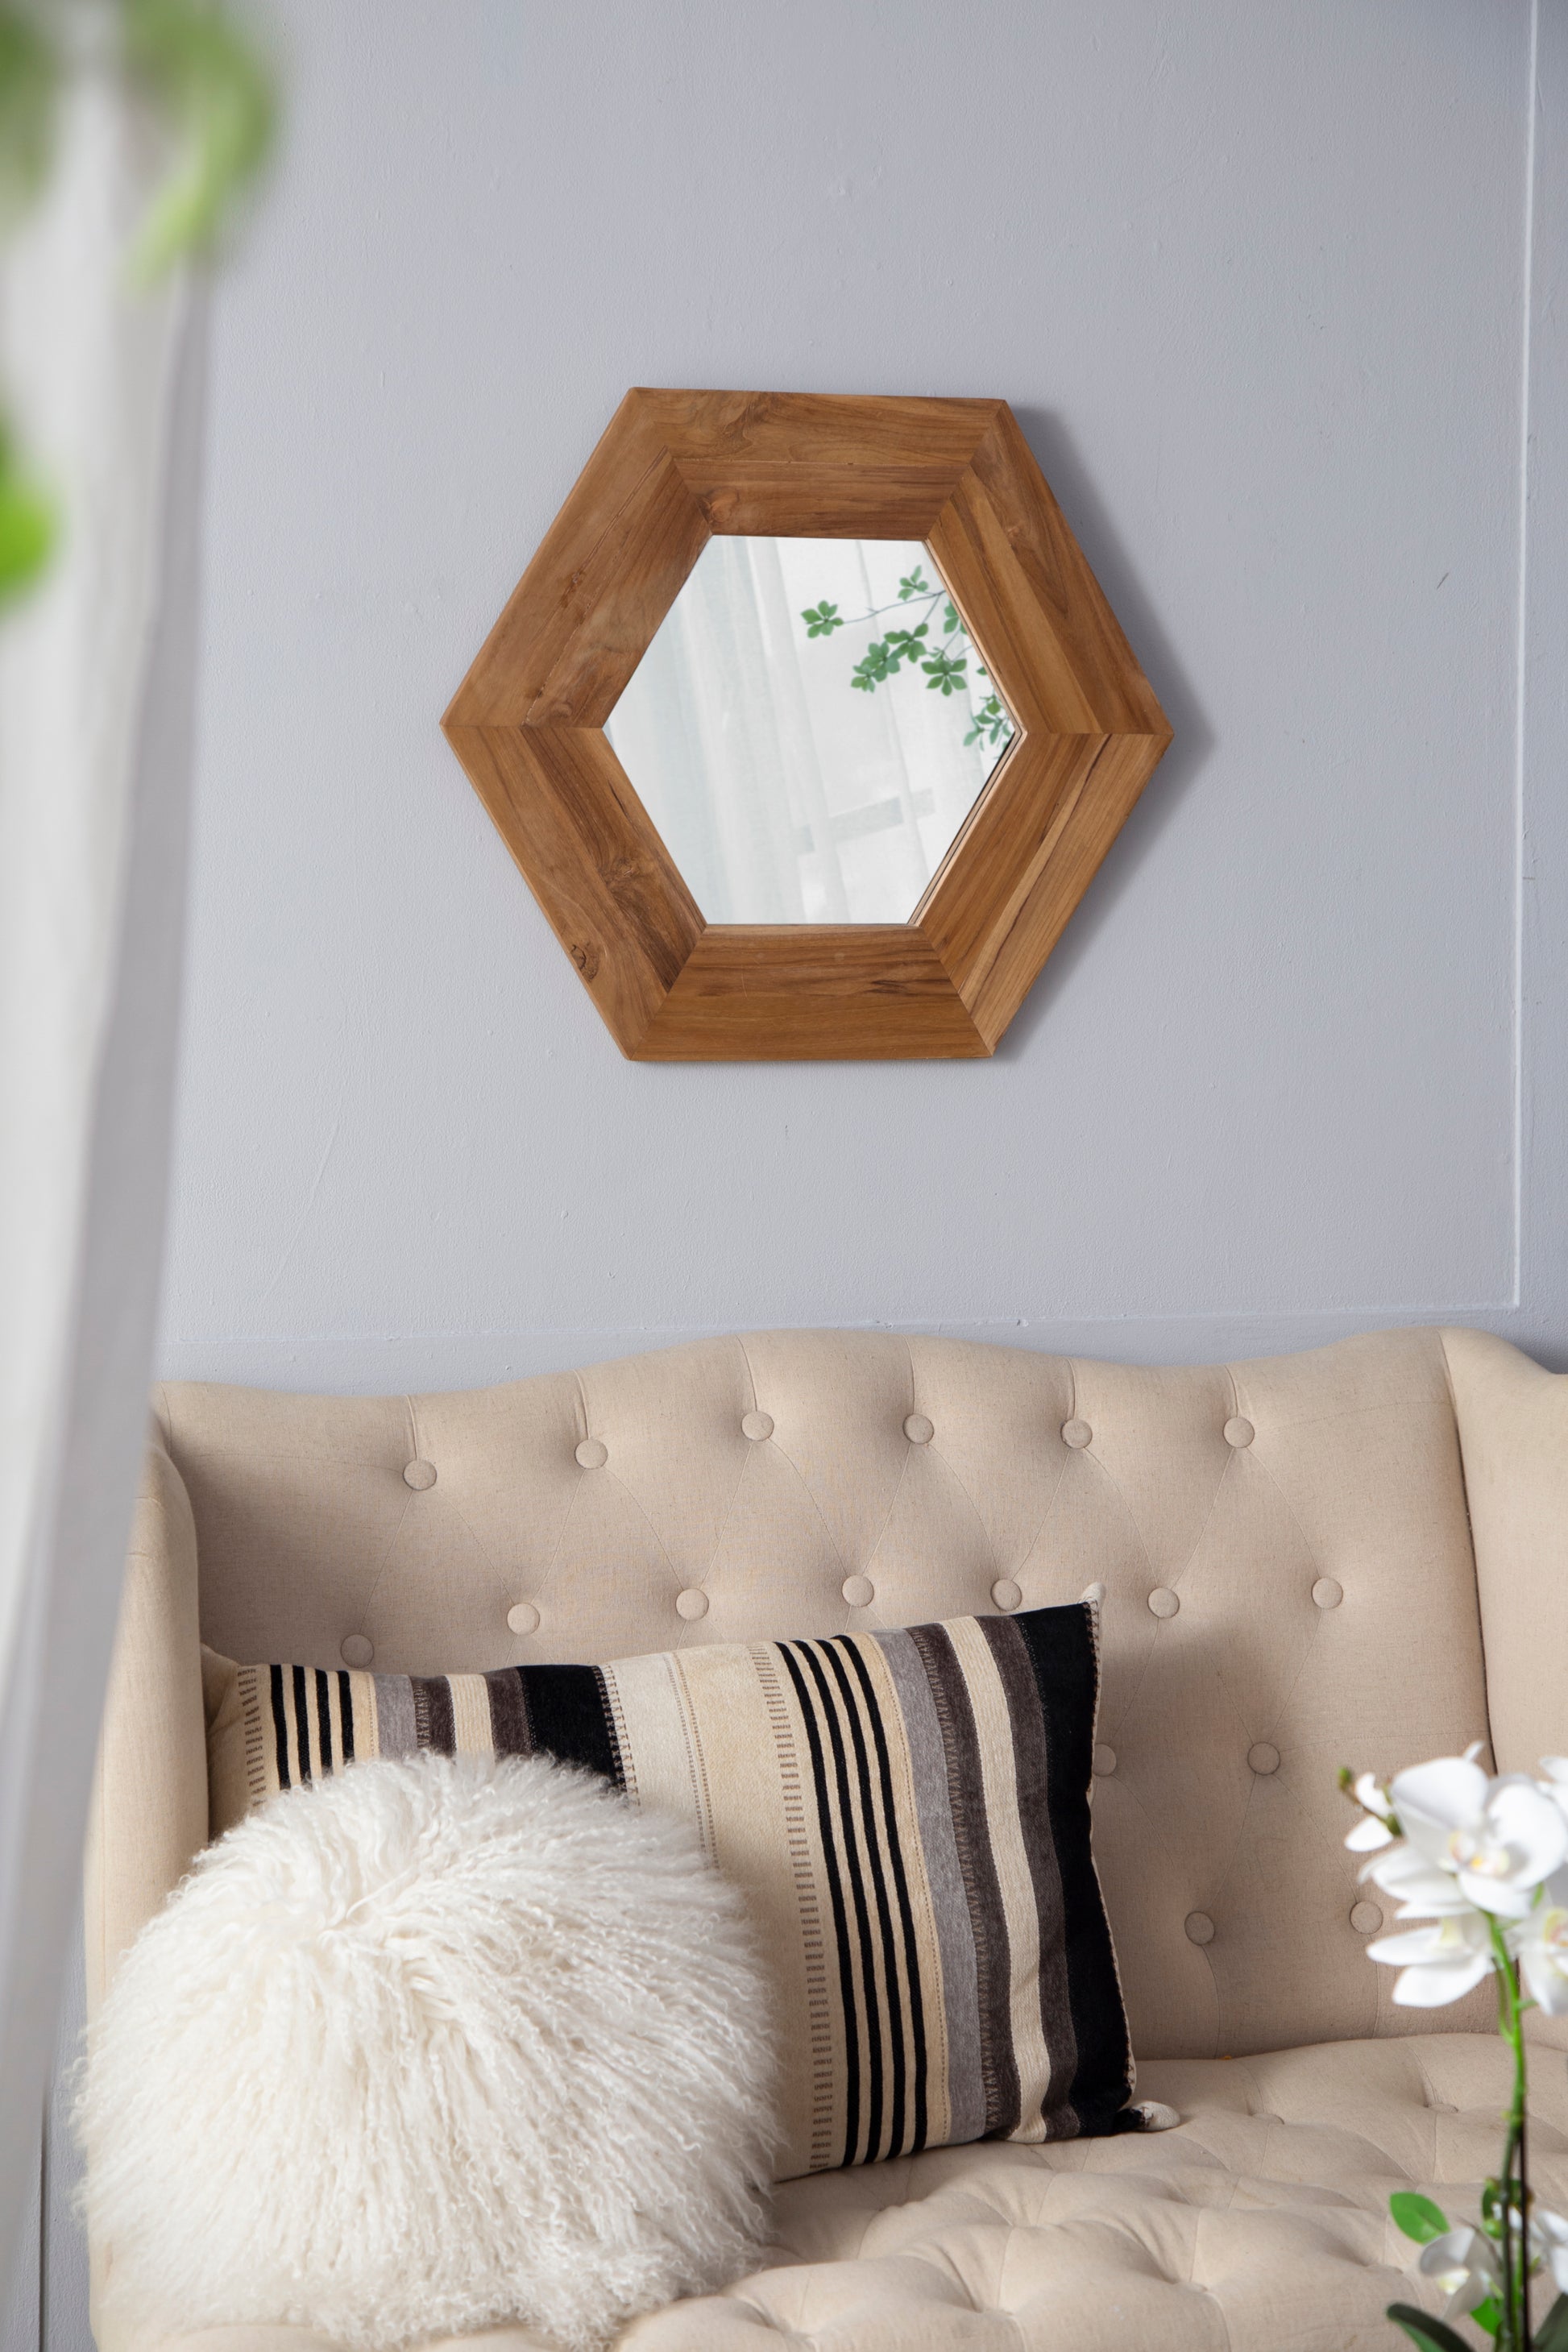 18.5" x 18.5" Hexagon Mirror with Natural Wood Frame natural-wood+glass